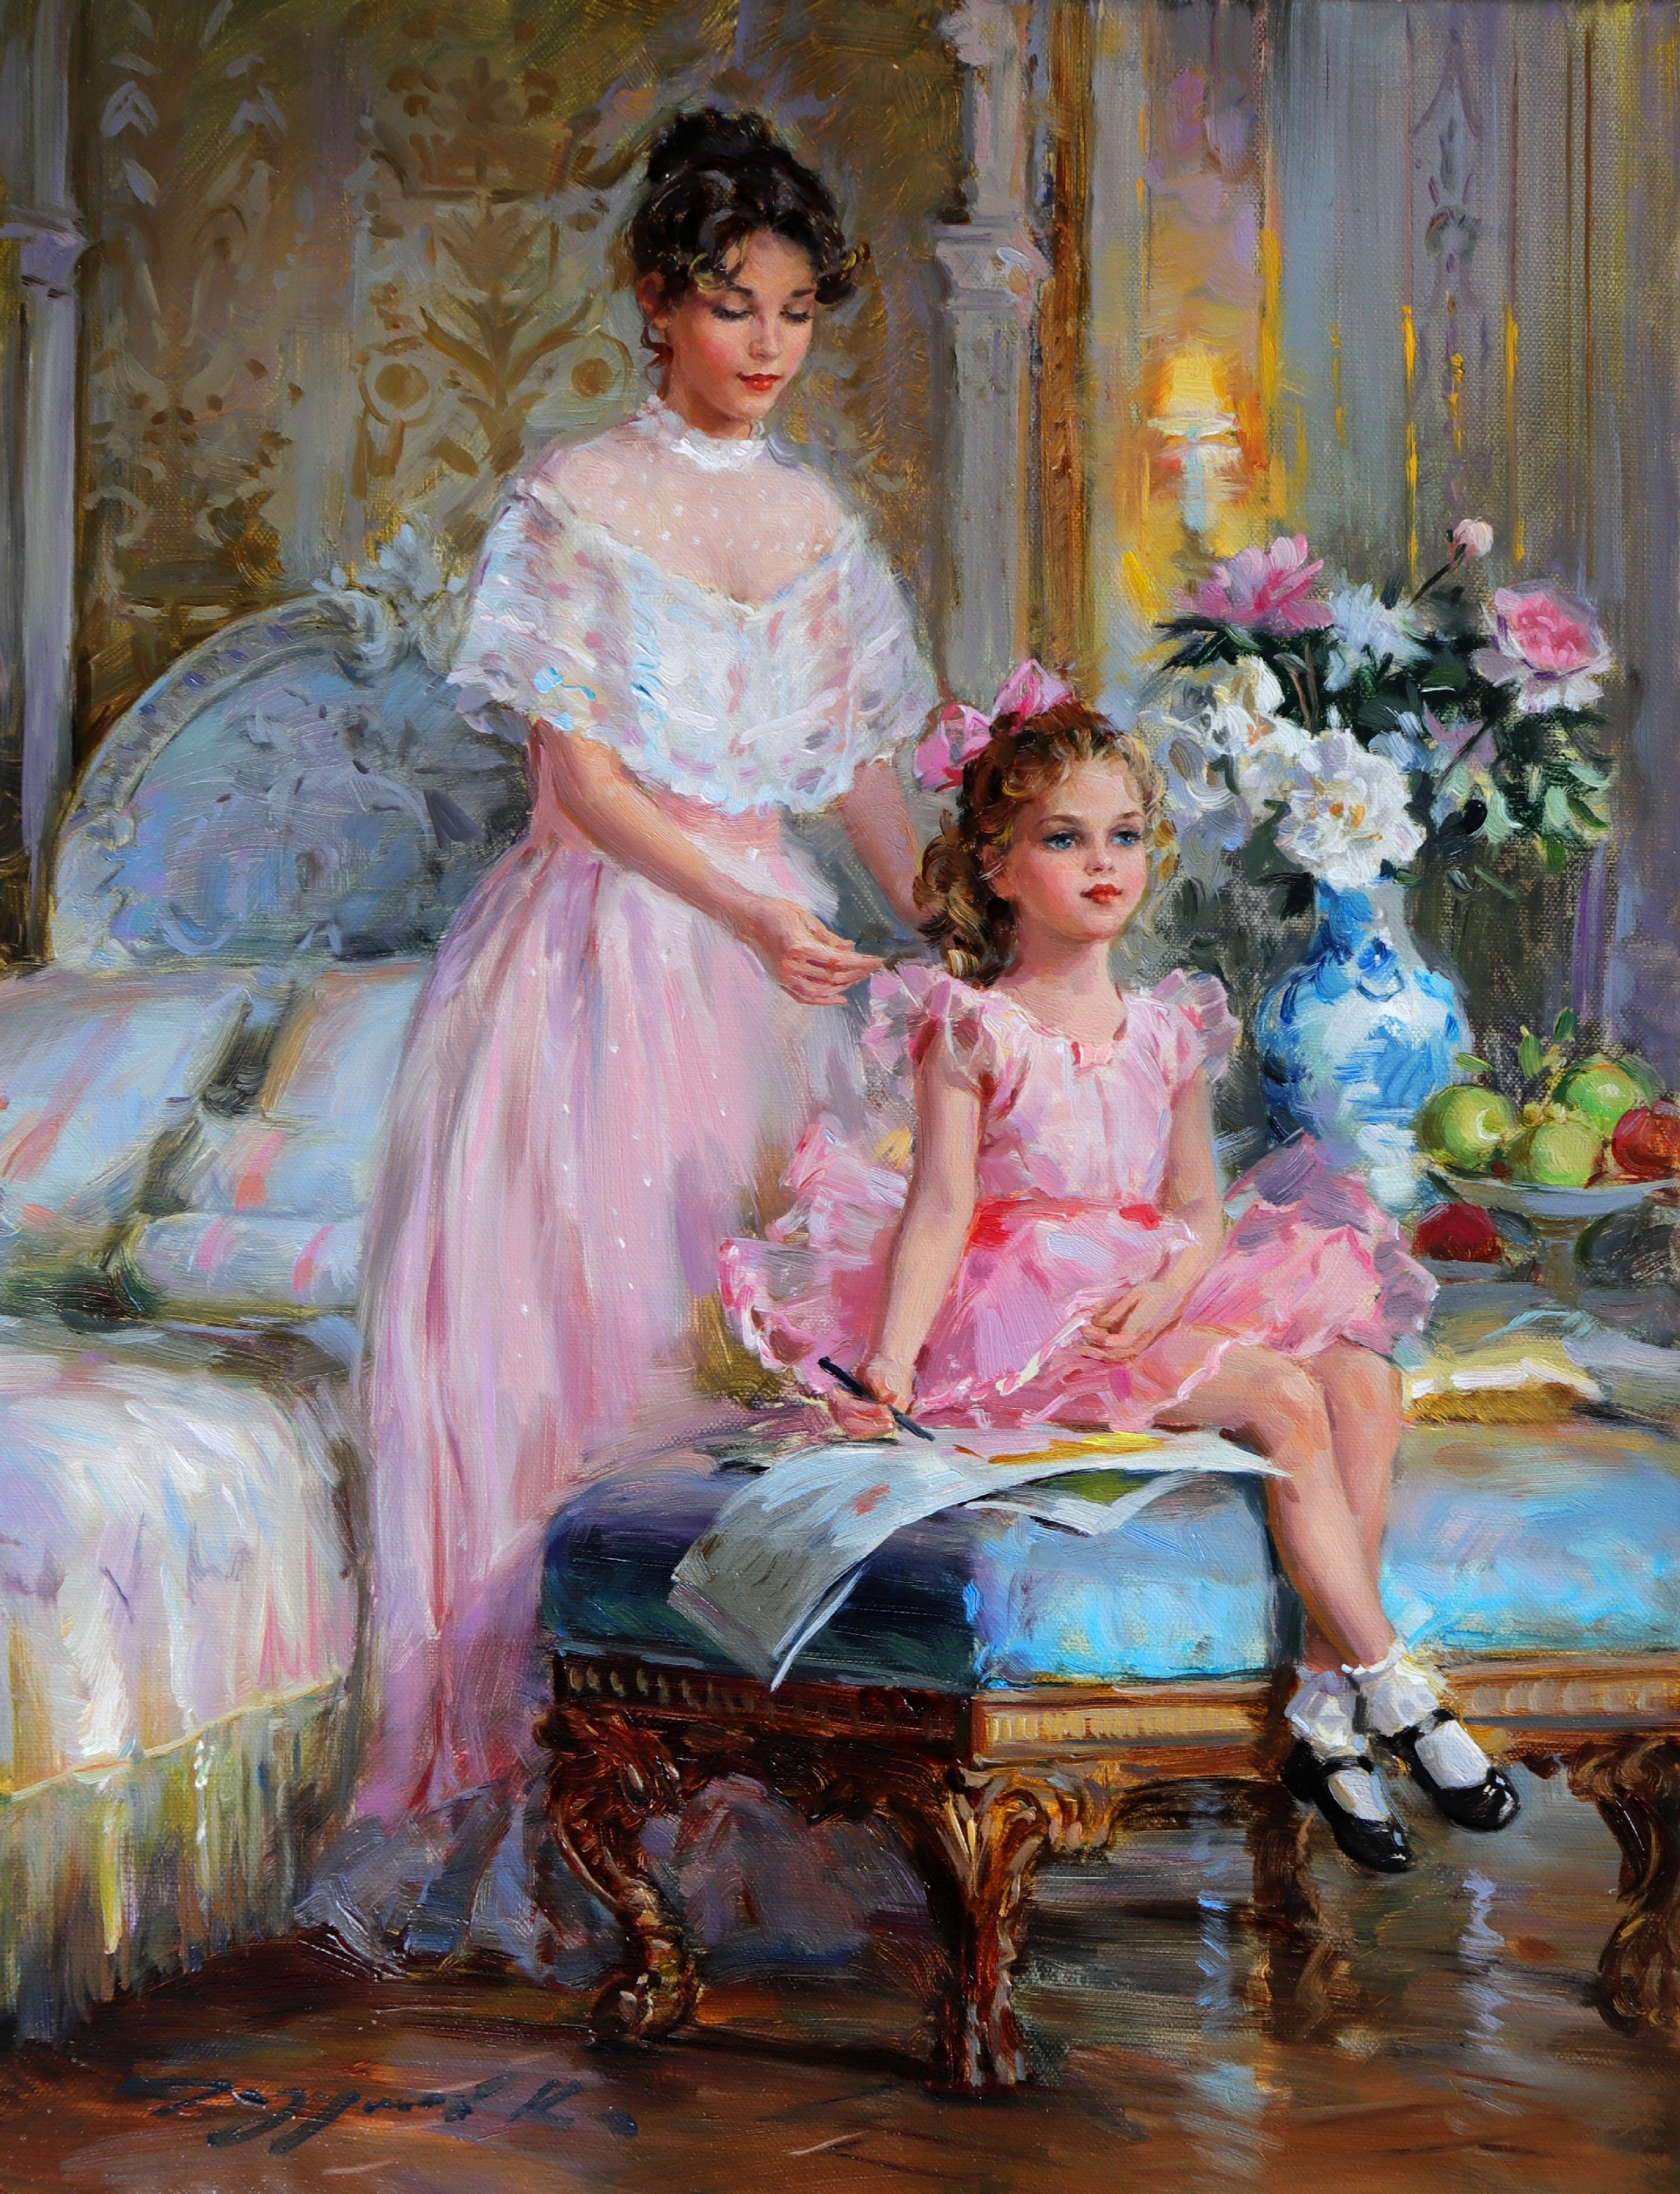 Konstantin Razumov (1974- ) Russian. "In the Bedroom", An Elegant Woman with a Young Girl writing,